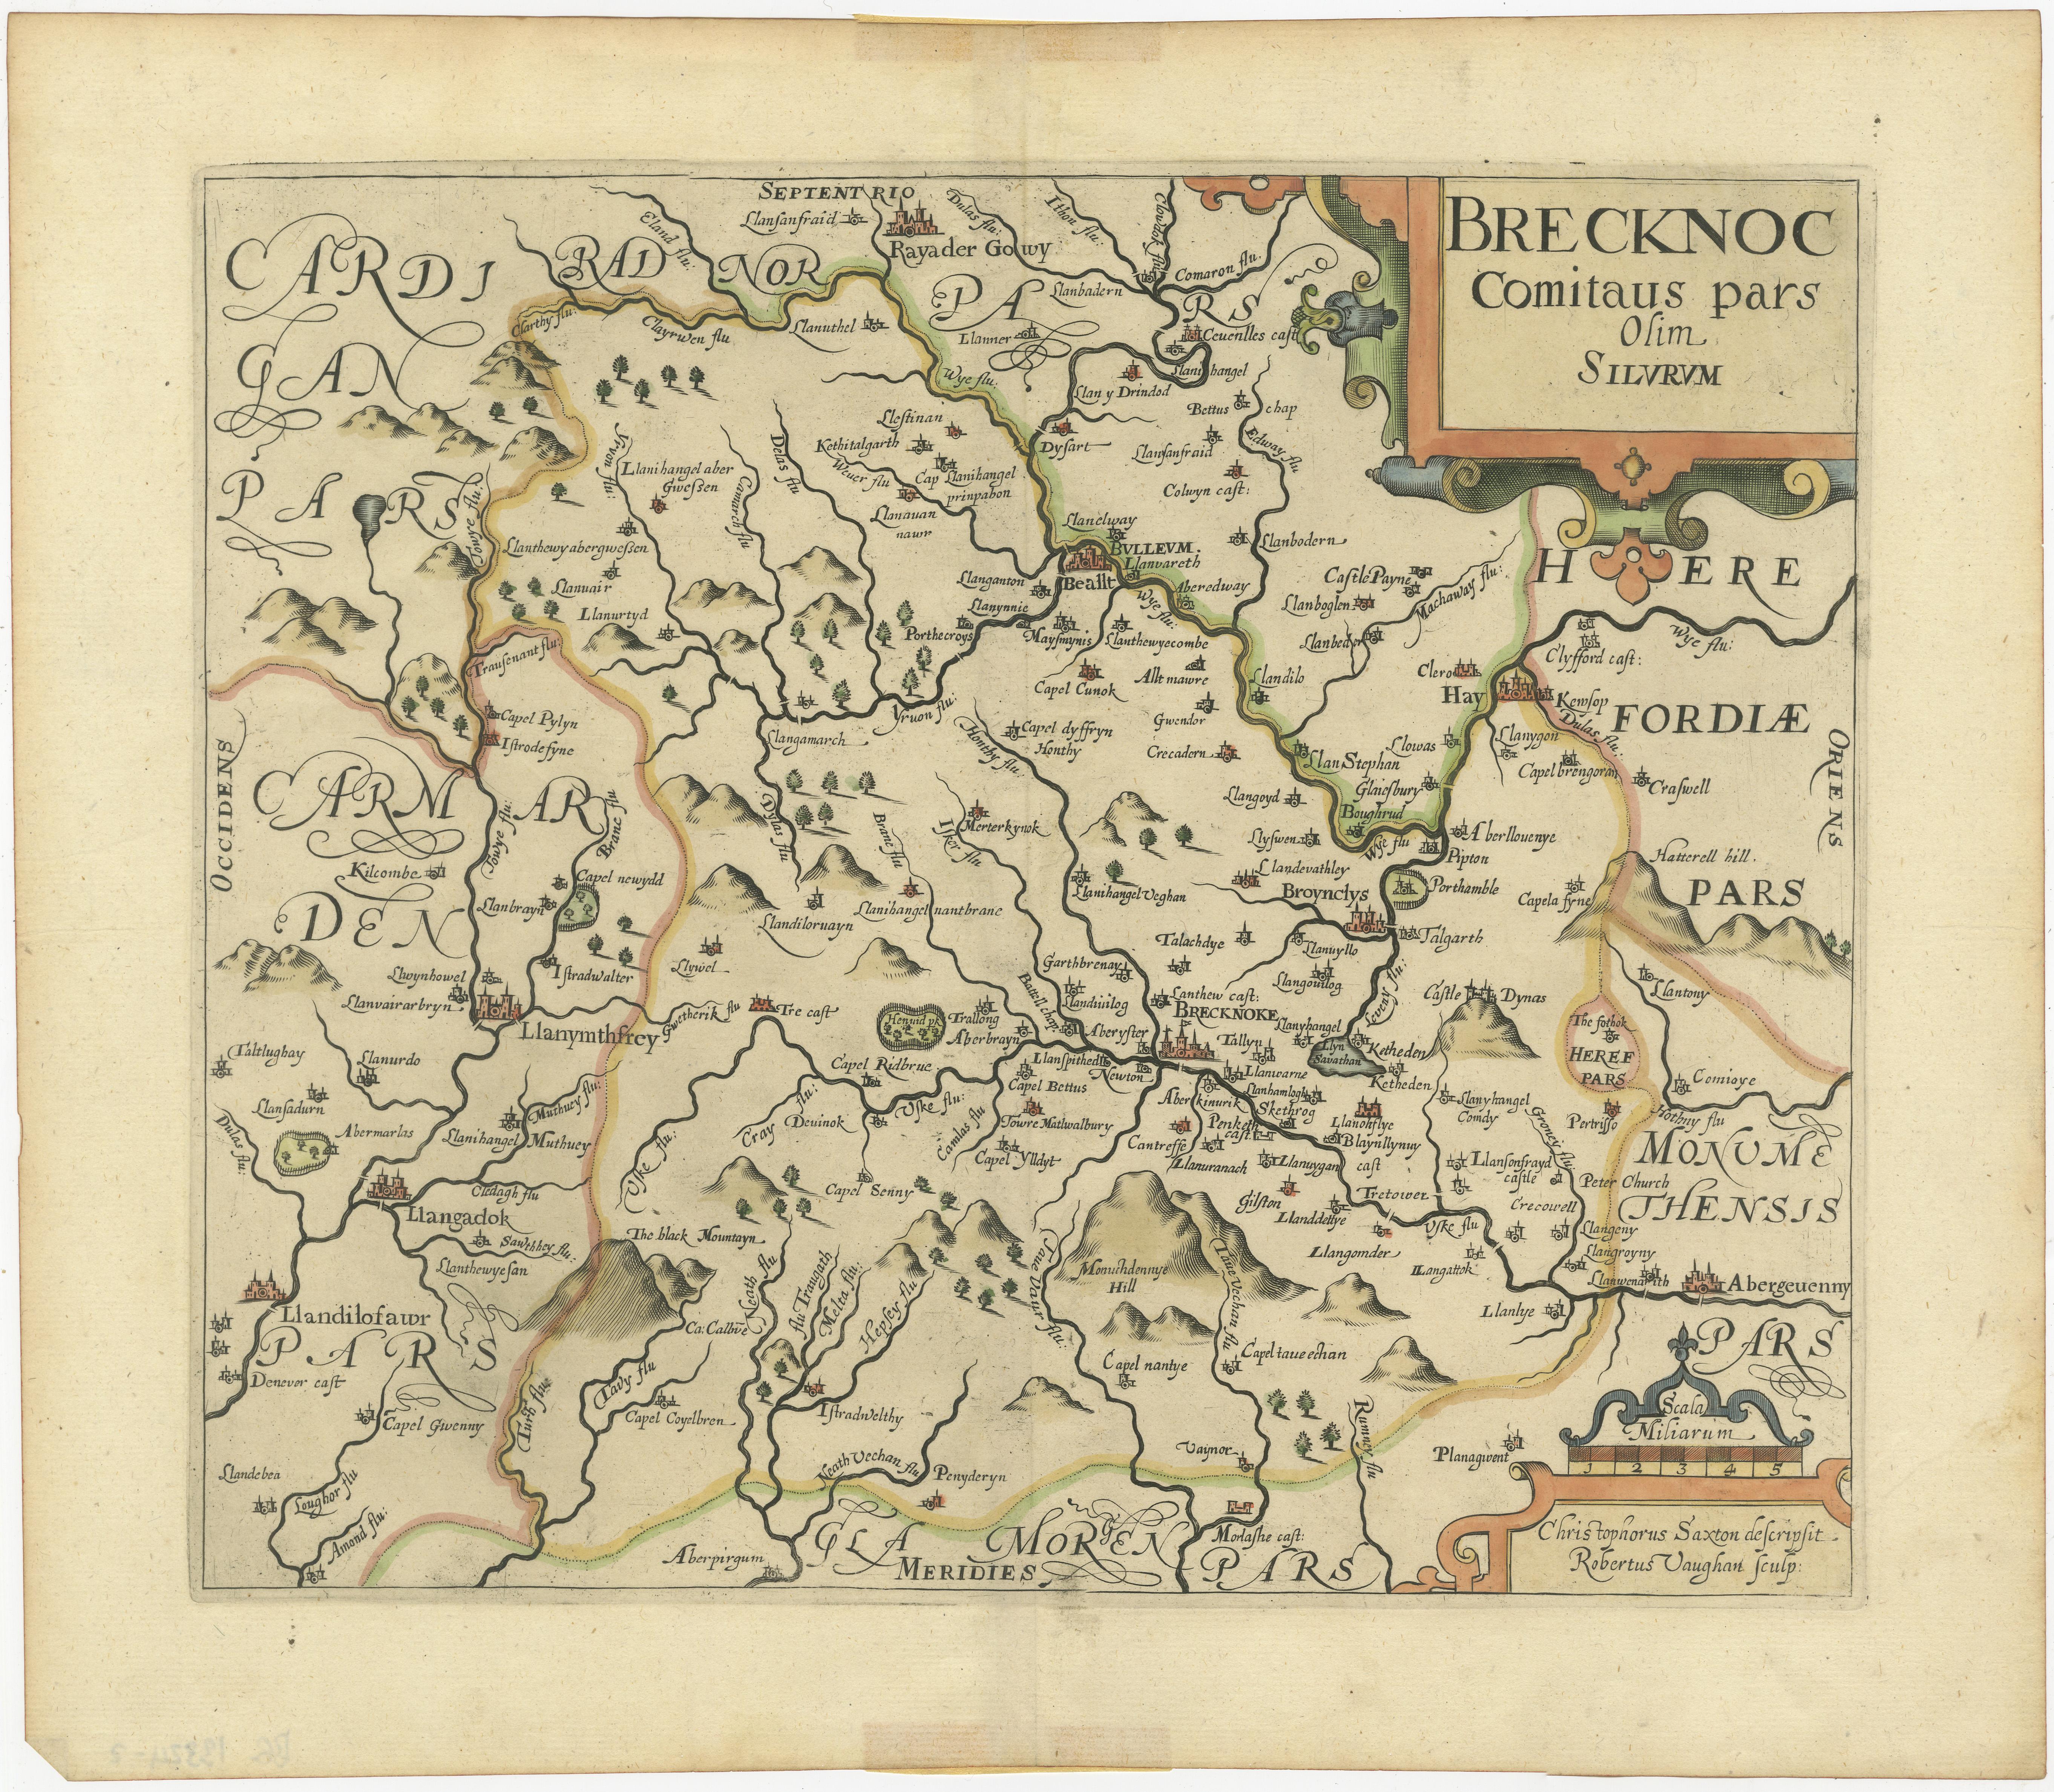 Antique map titled 'Brecknoc comitaus pars olim silurum'. Original old map of Brecknockshire, Wales. Engraved by R. Vaughan after Christopher Saxton. Published circa 1640.